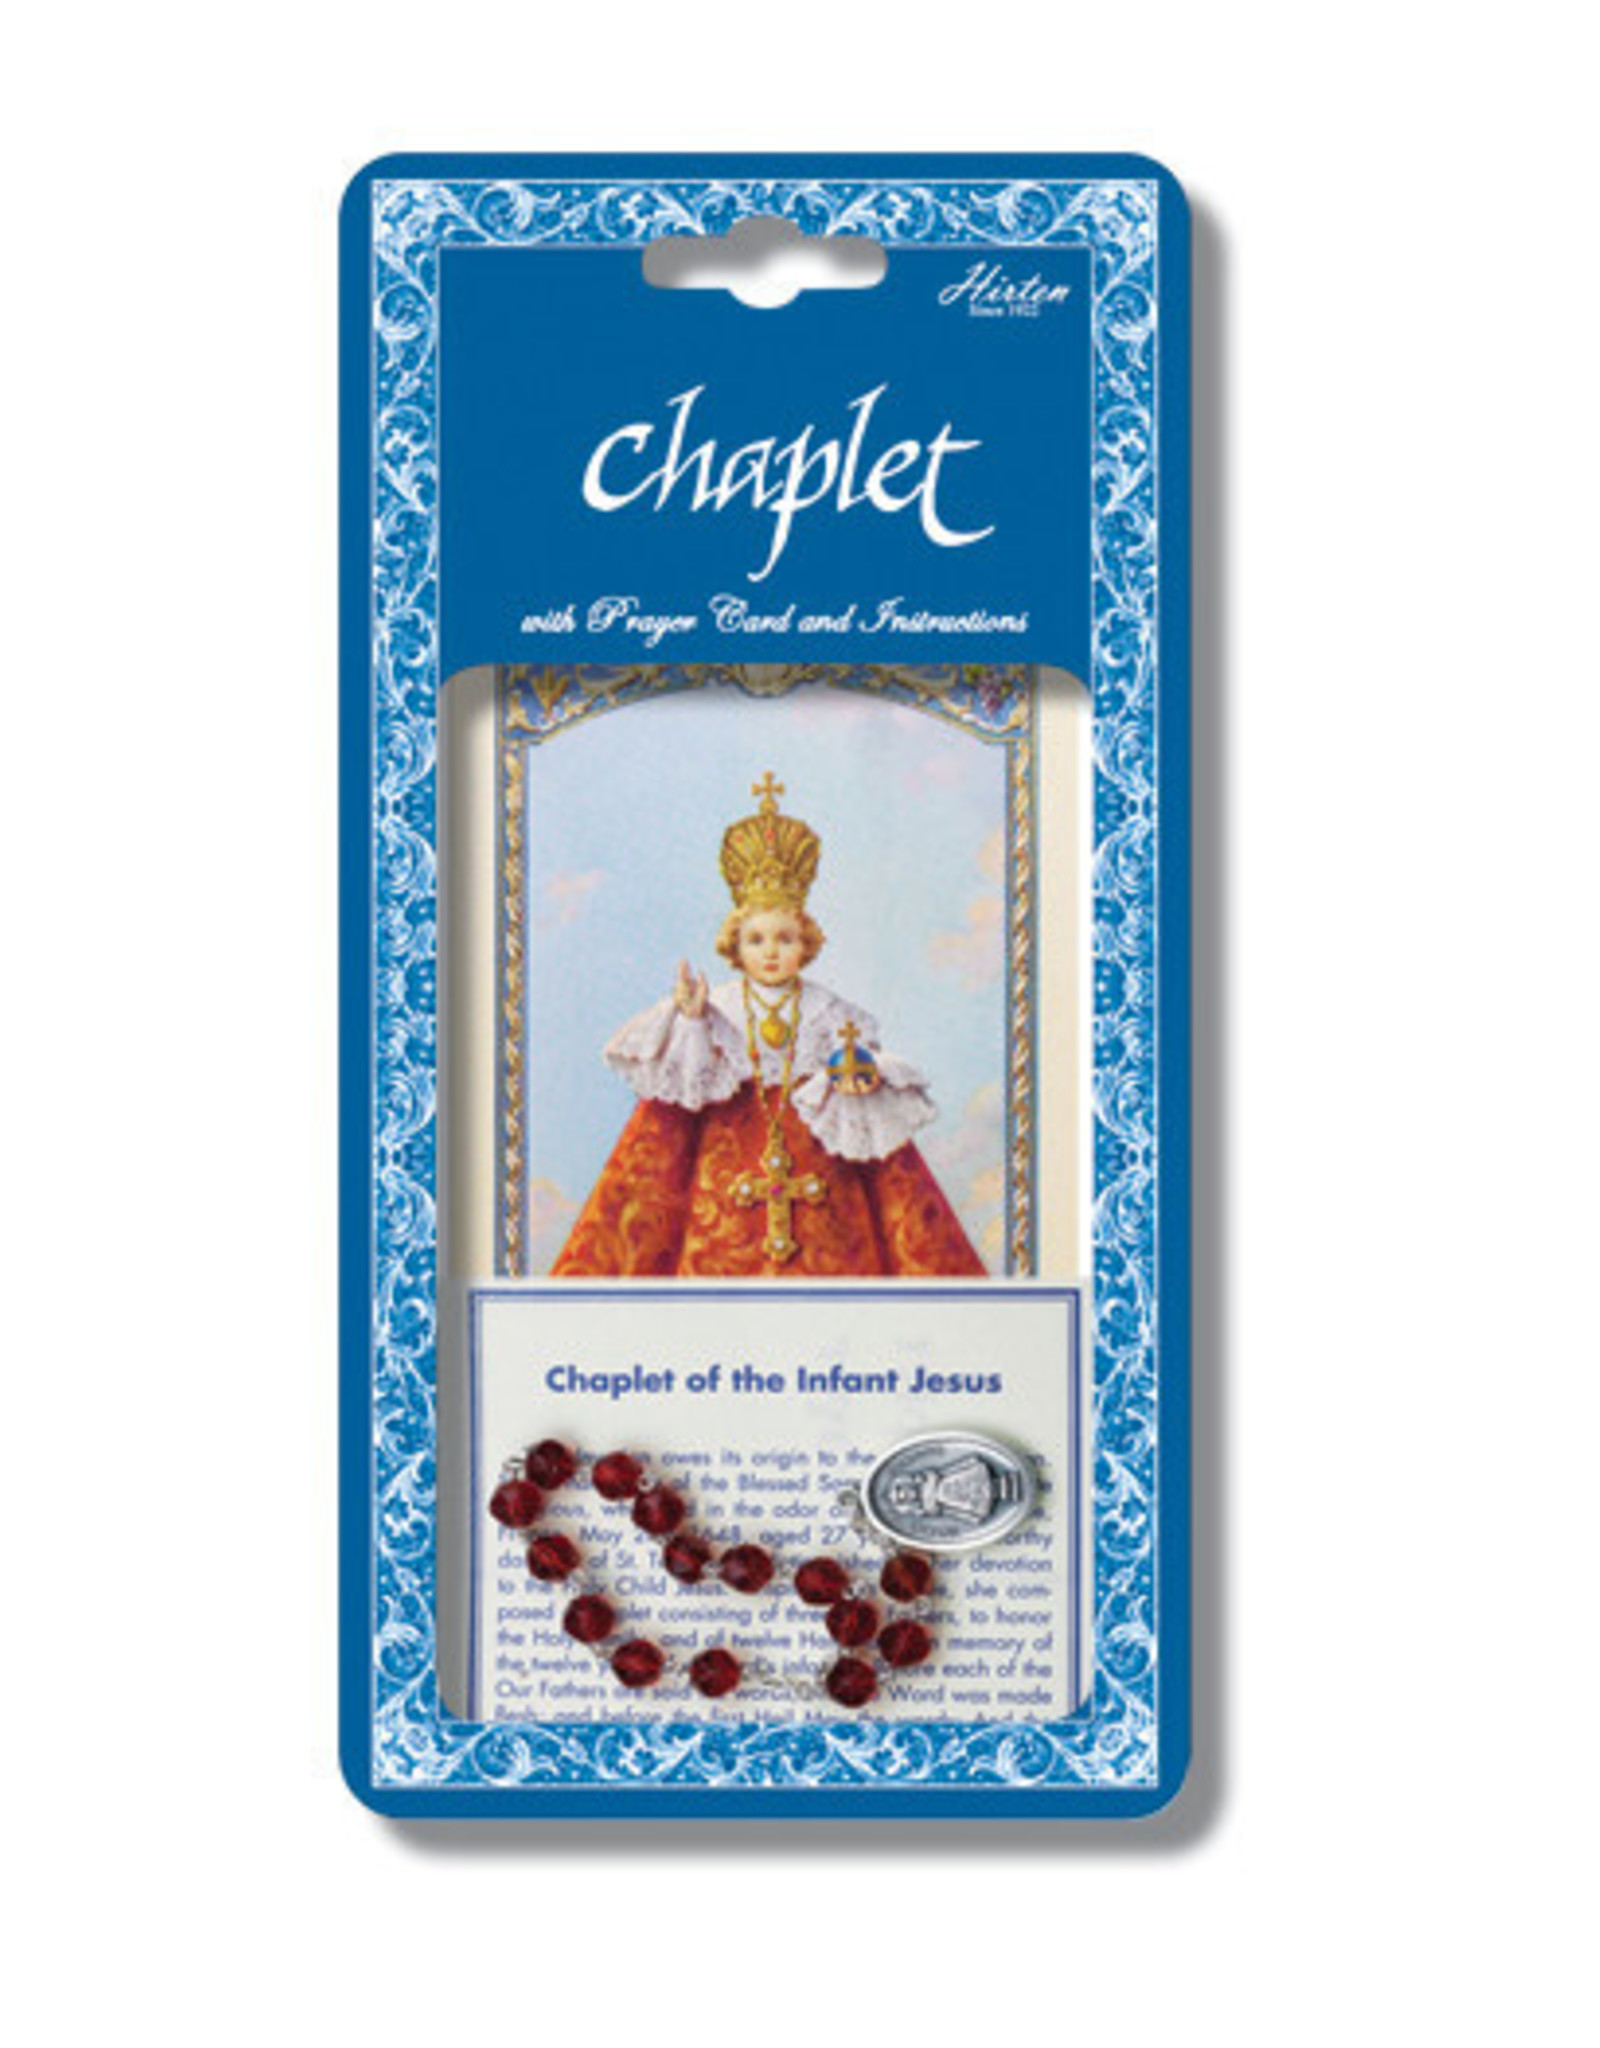 Hirten Infant of Prague Chaplet with Prayer Card and Instructions